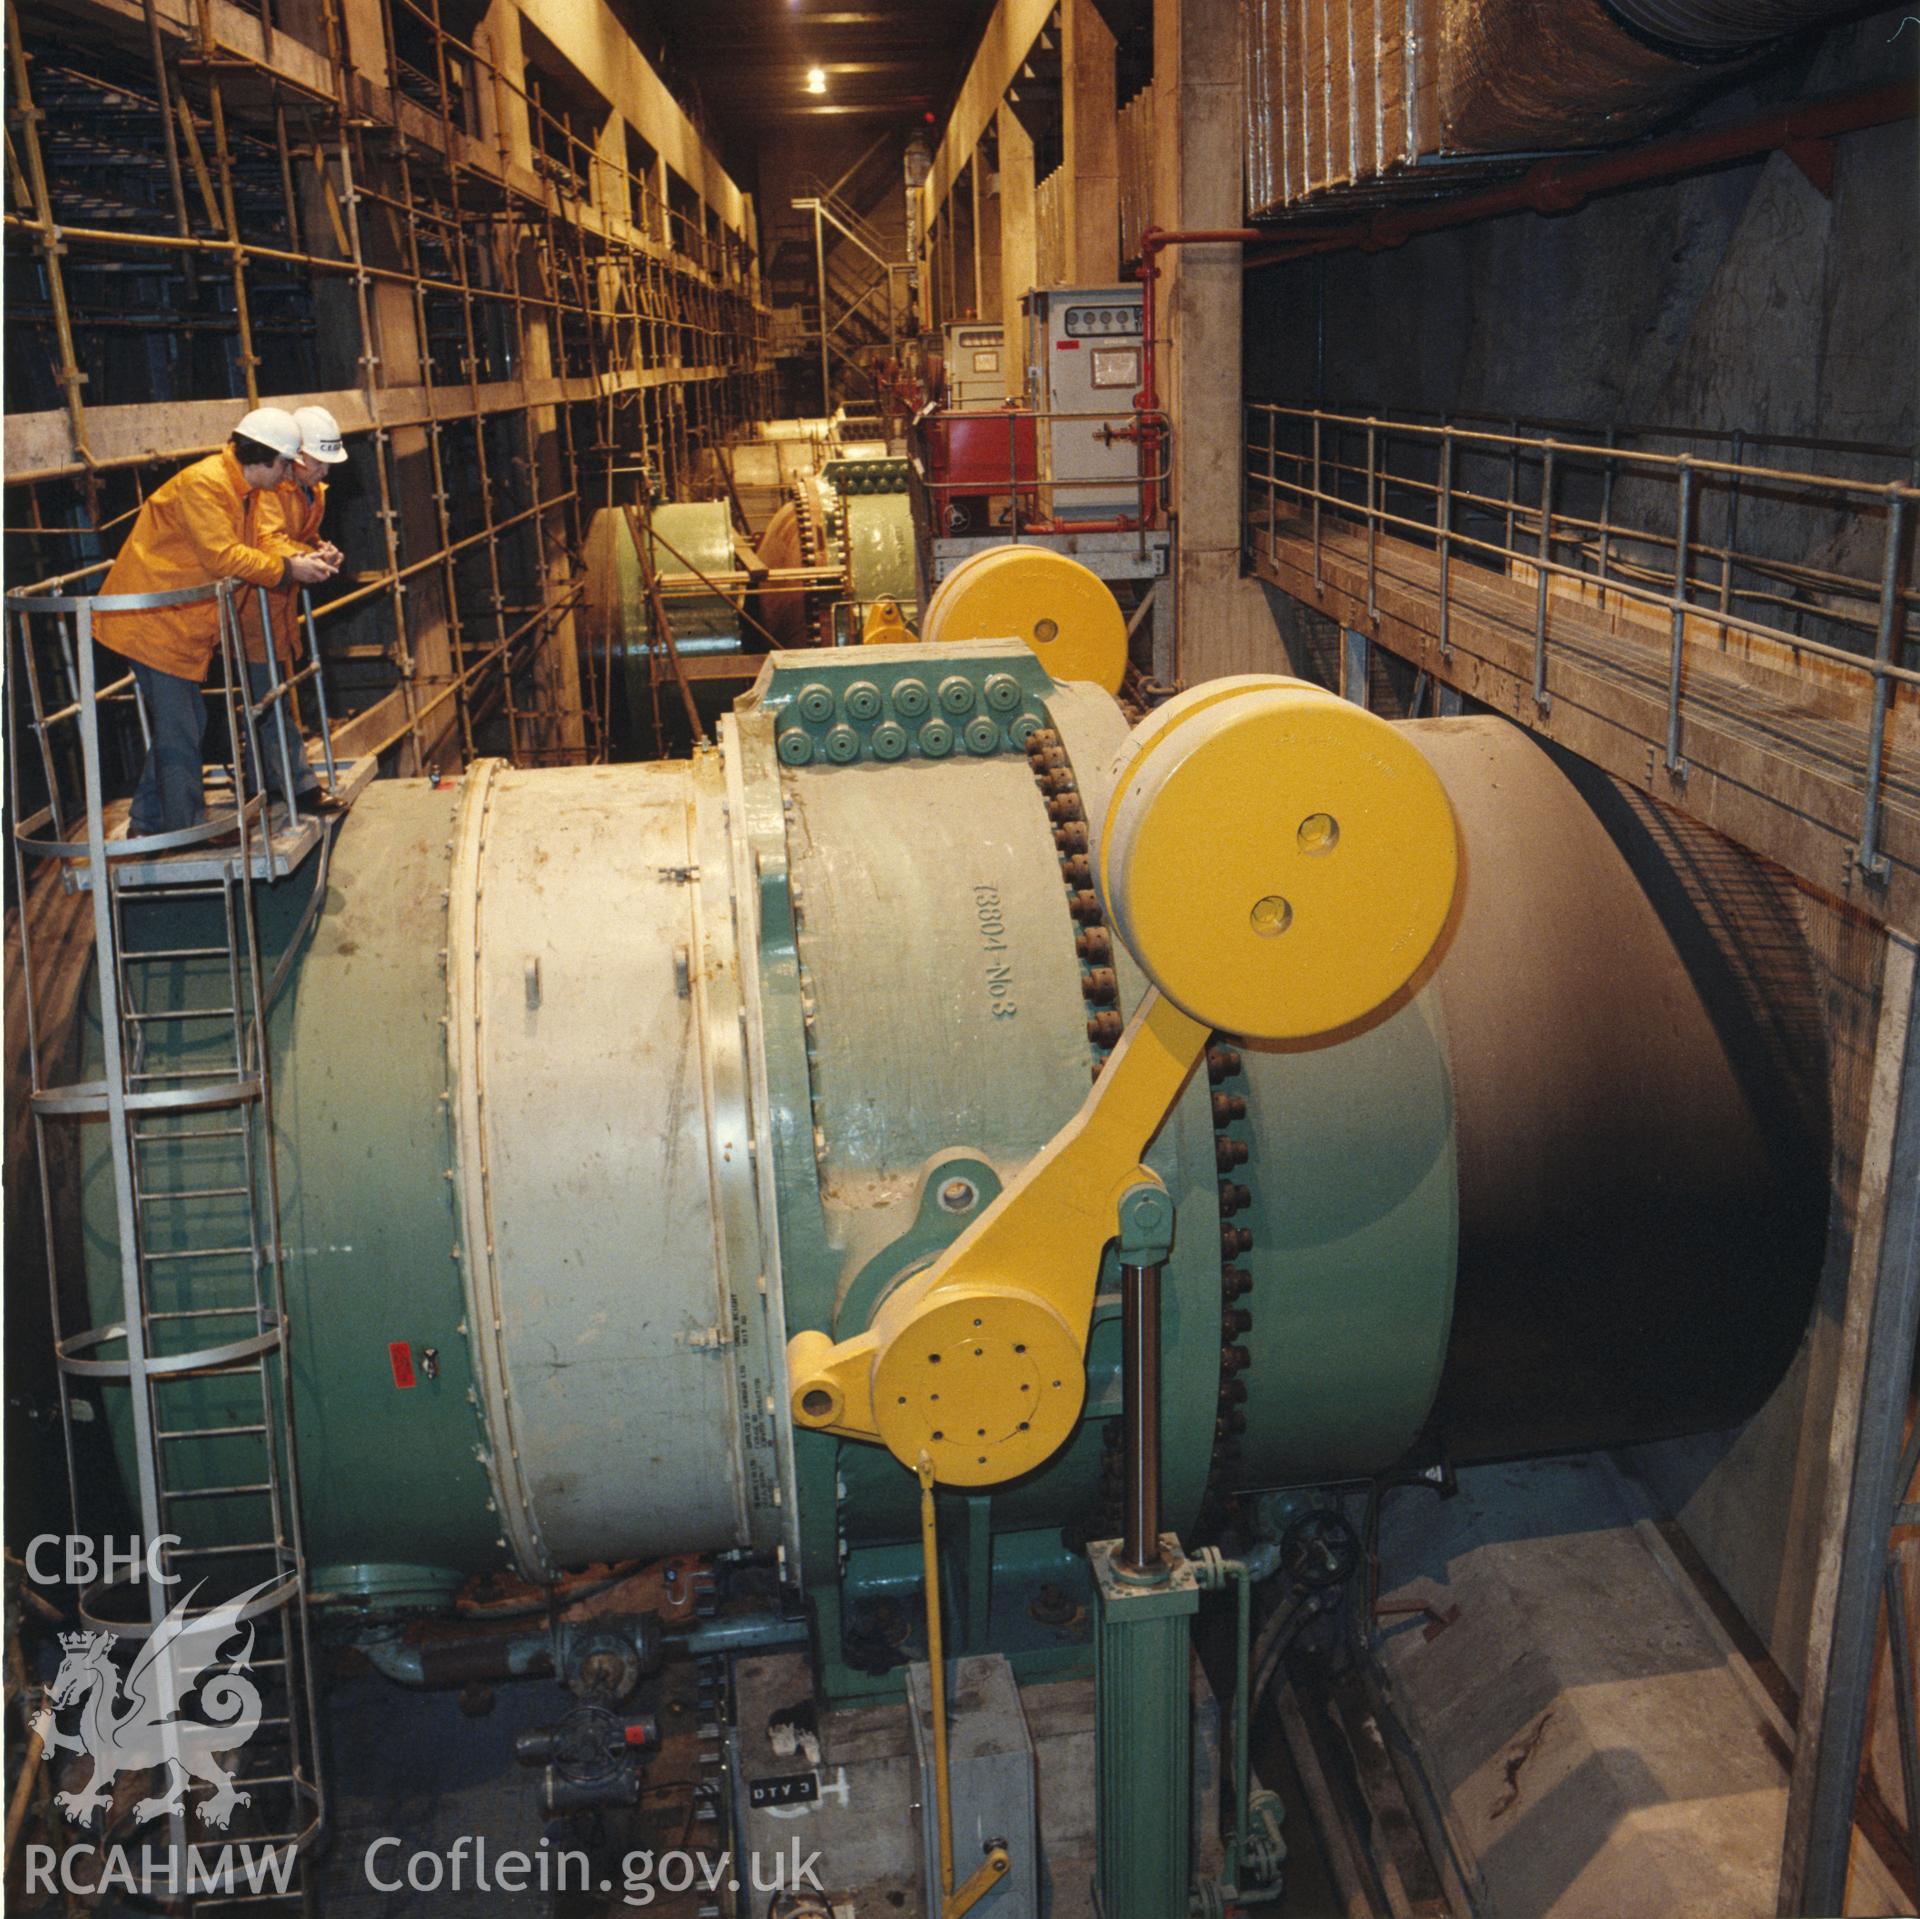 1 colour transparency showing interior at Dinorwig Power Station; collated by the former Central Office of Information.